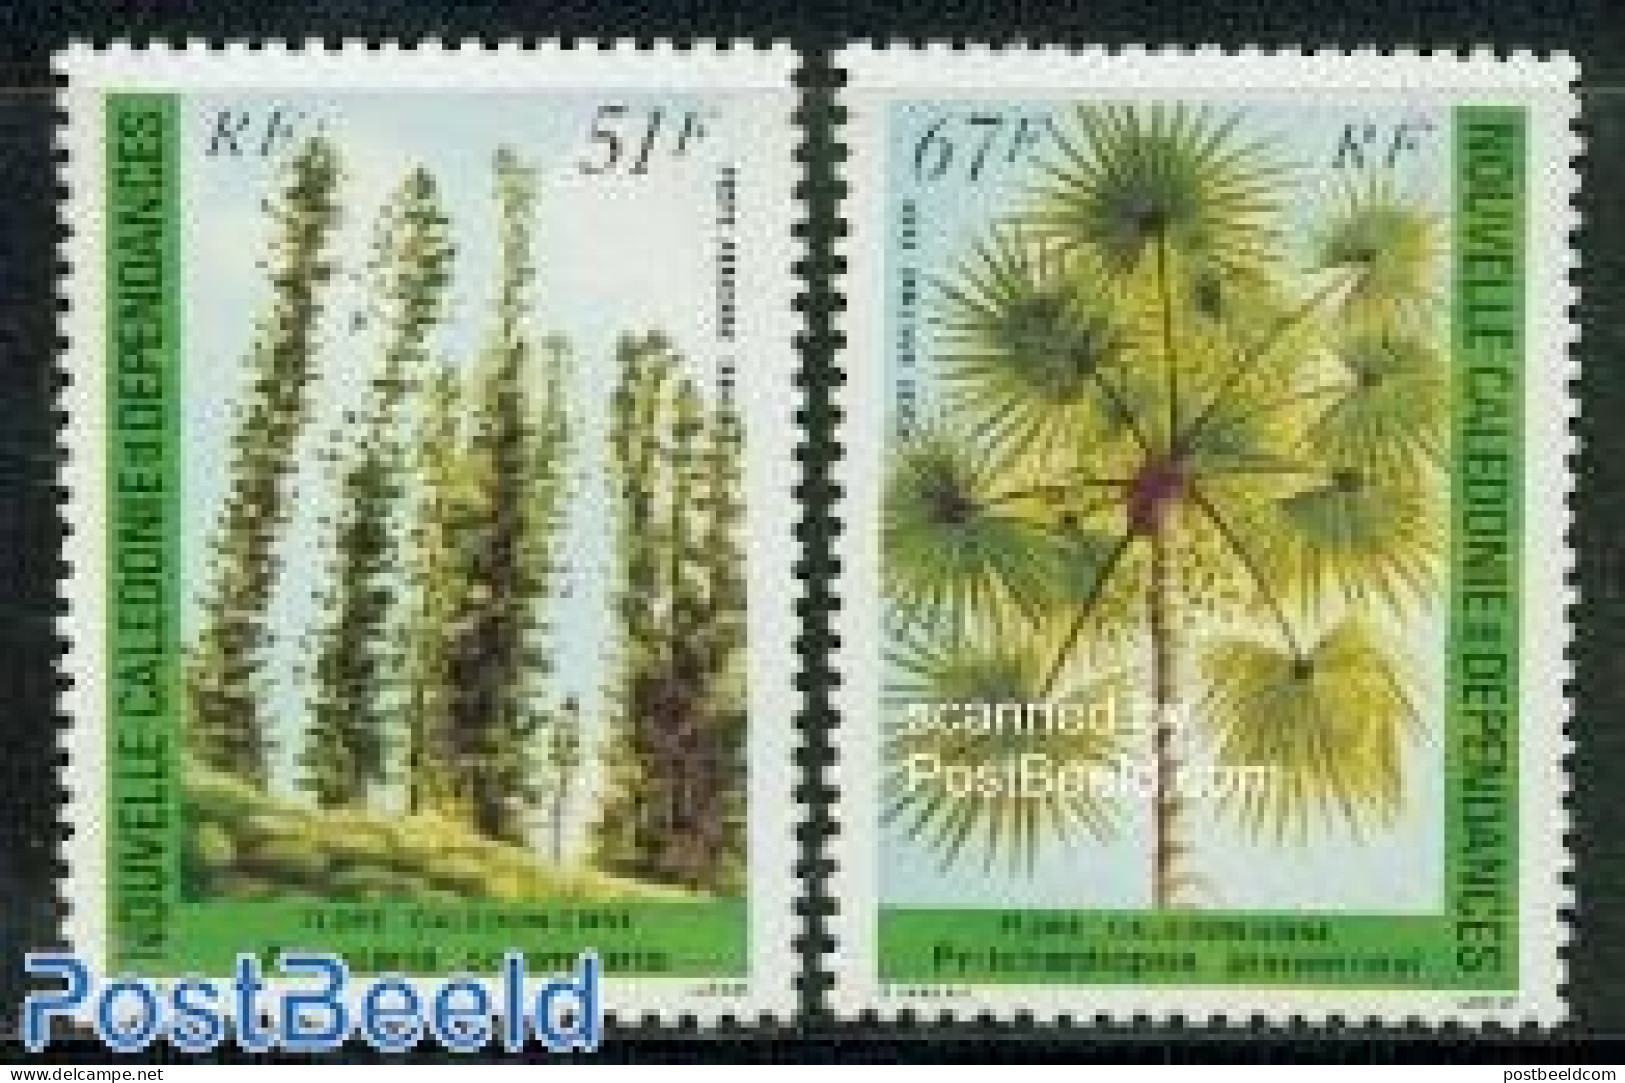 New Caledonia 1984 Flora 2v, Mint NH, Nature - Flowers & Plants - Trees & Forests - Neufs